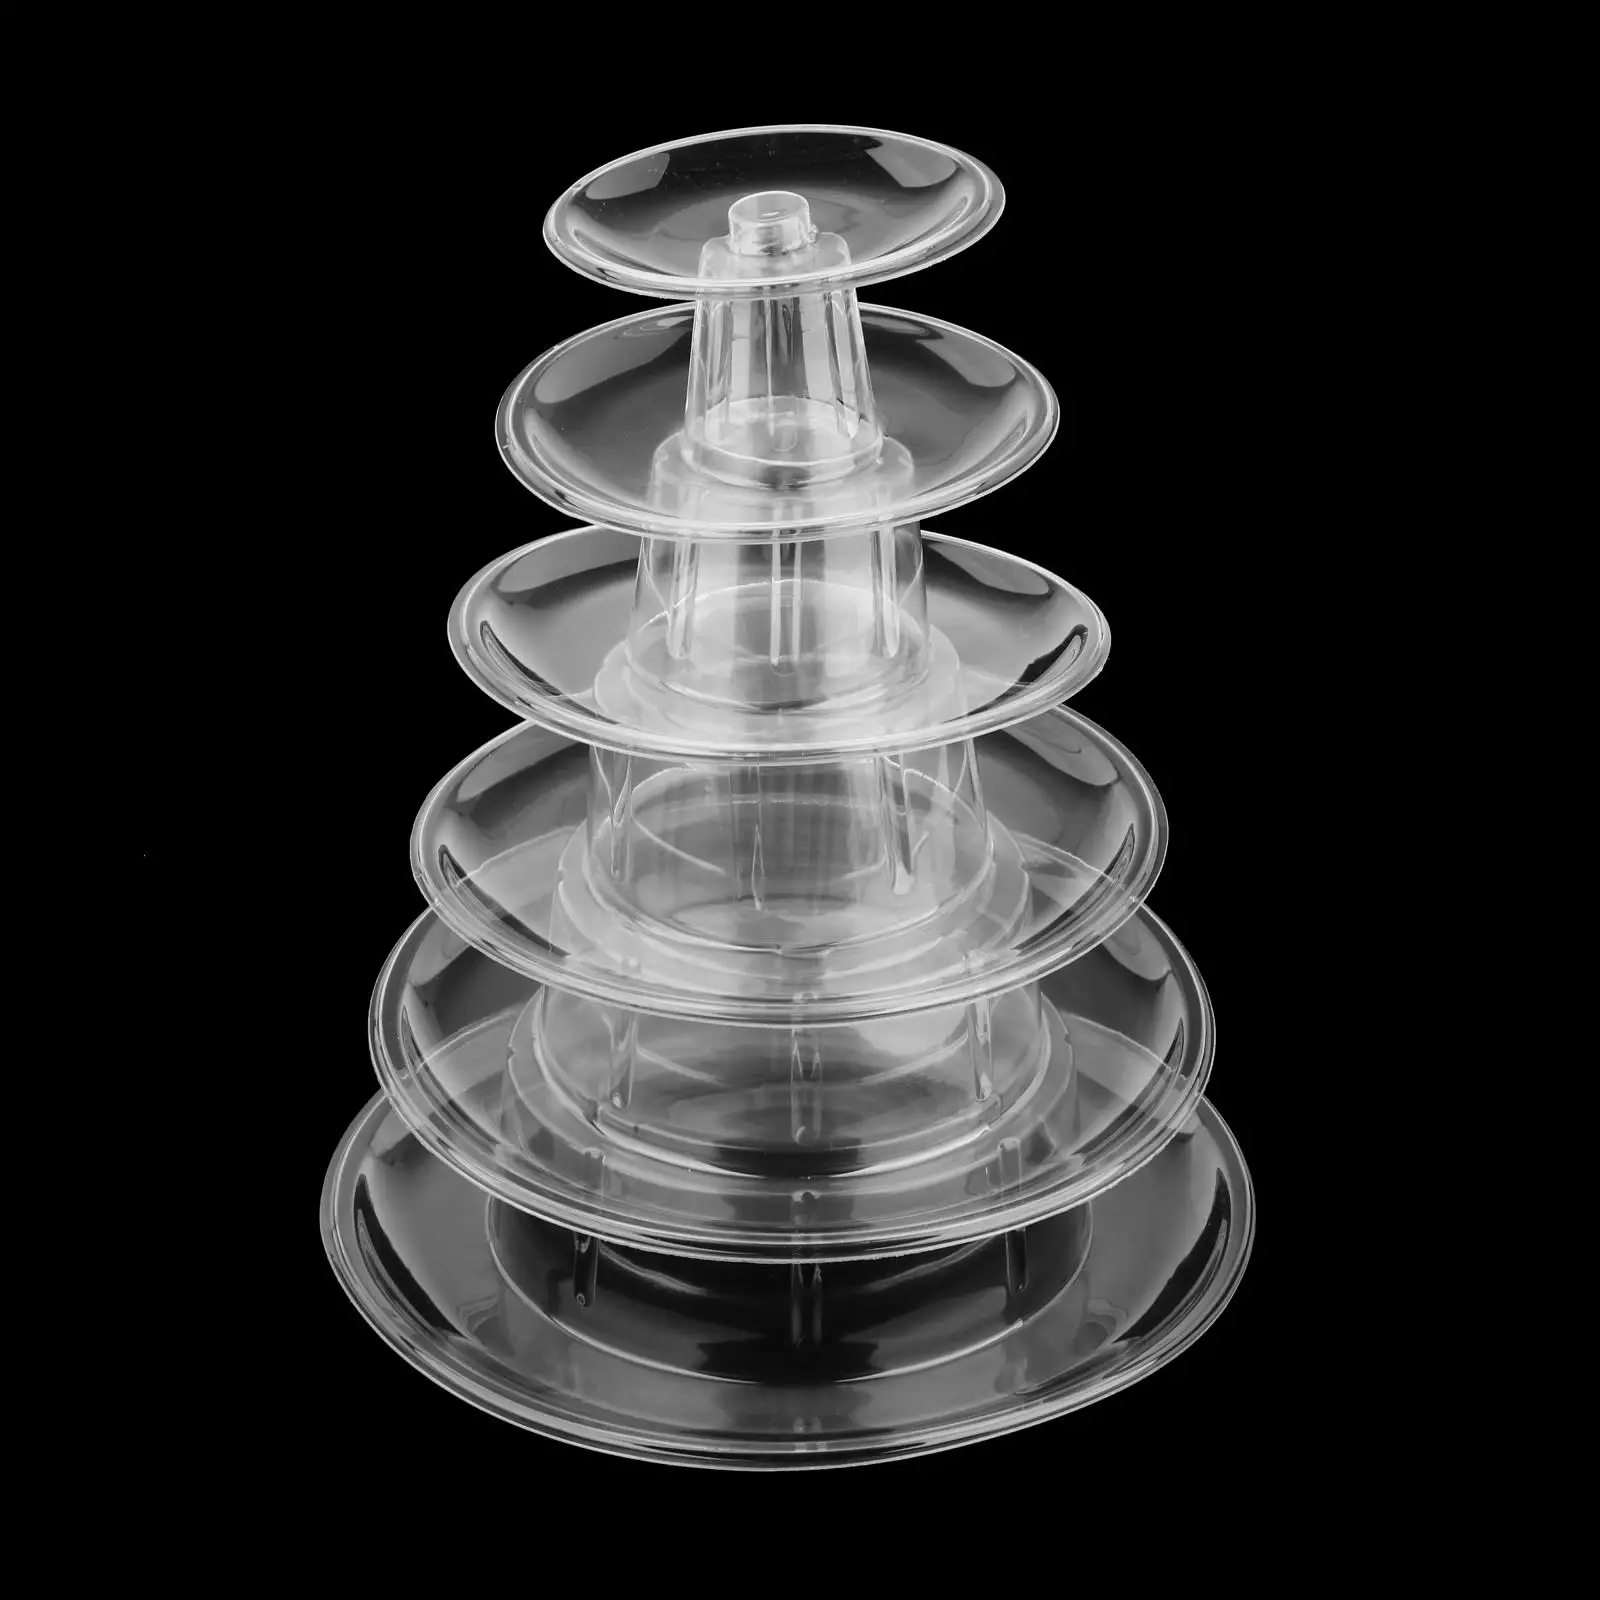 6 Tiers Macaron Tower Stand Cake Display Rack Cupcake/Food/ Fruit Stand Display for Wedding Party Event Use